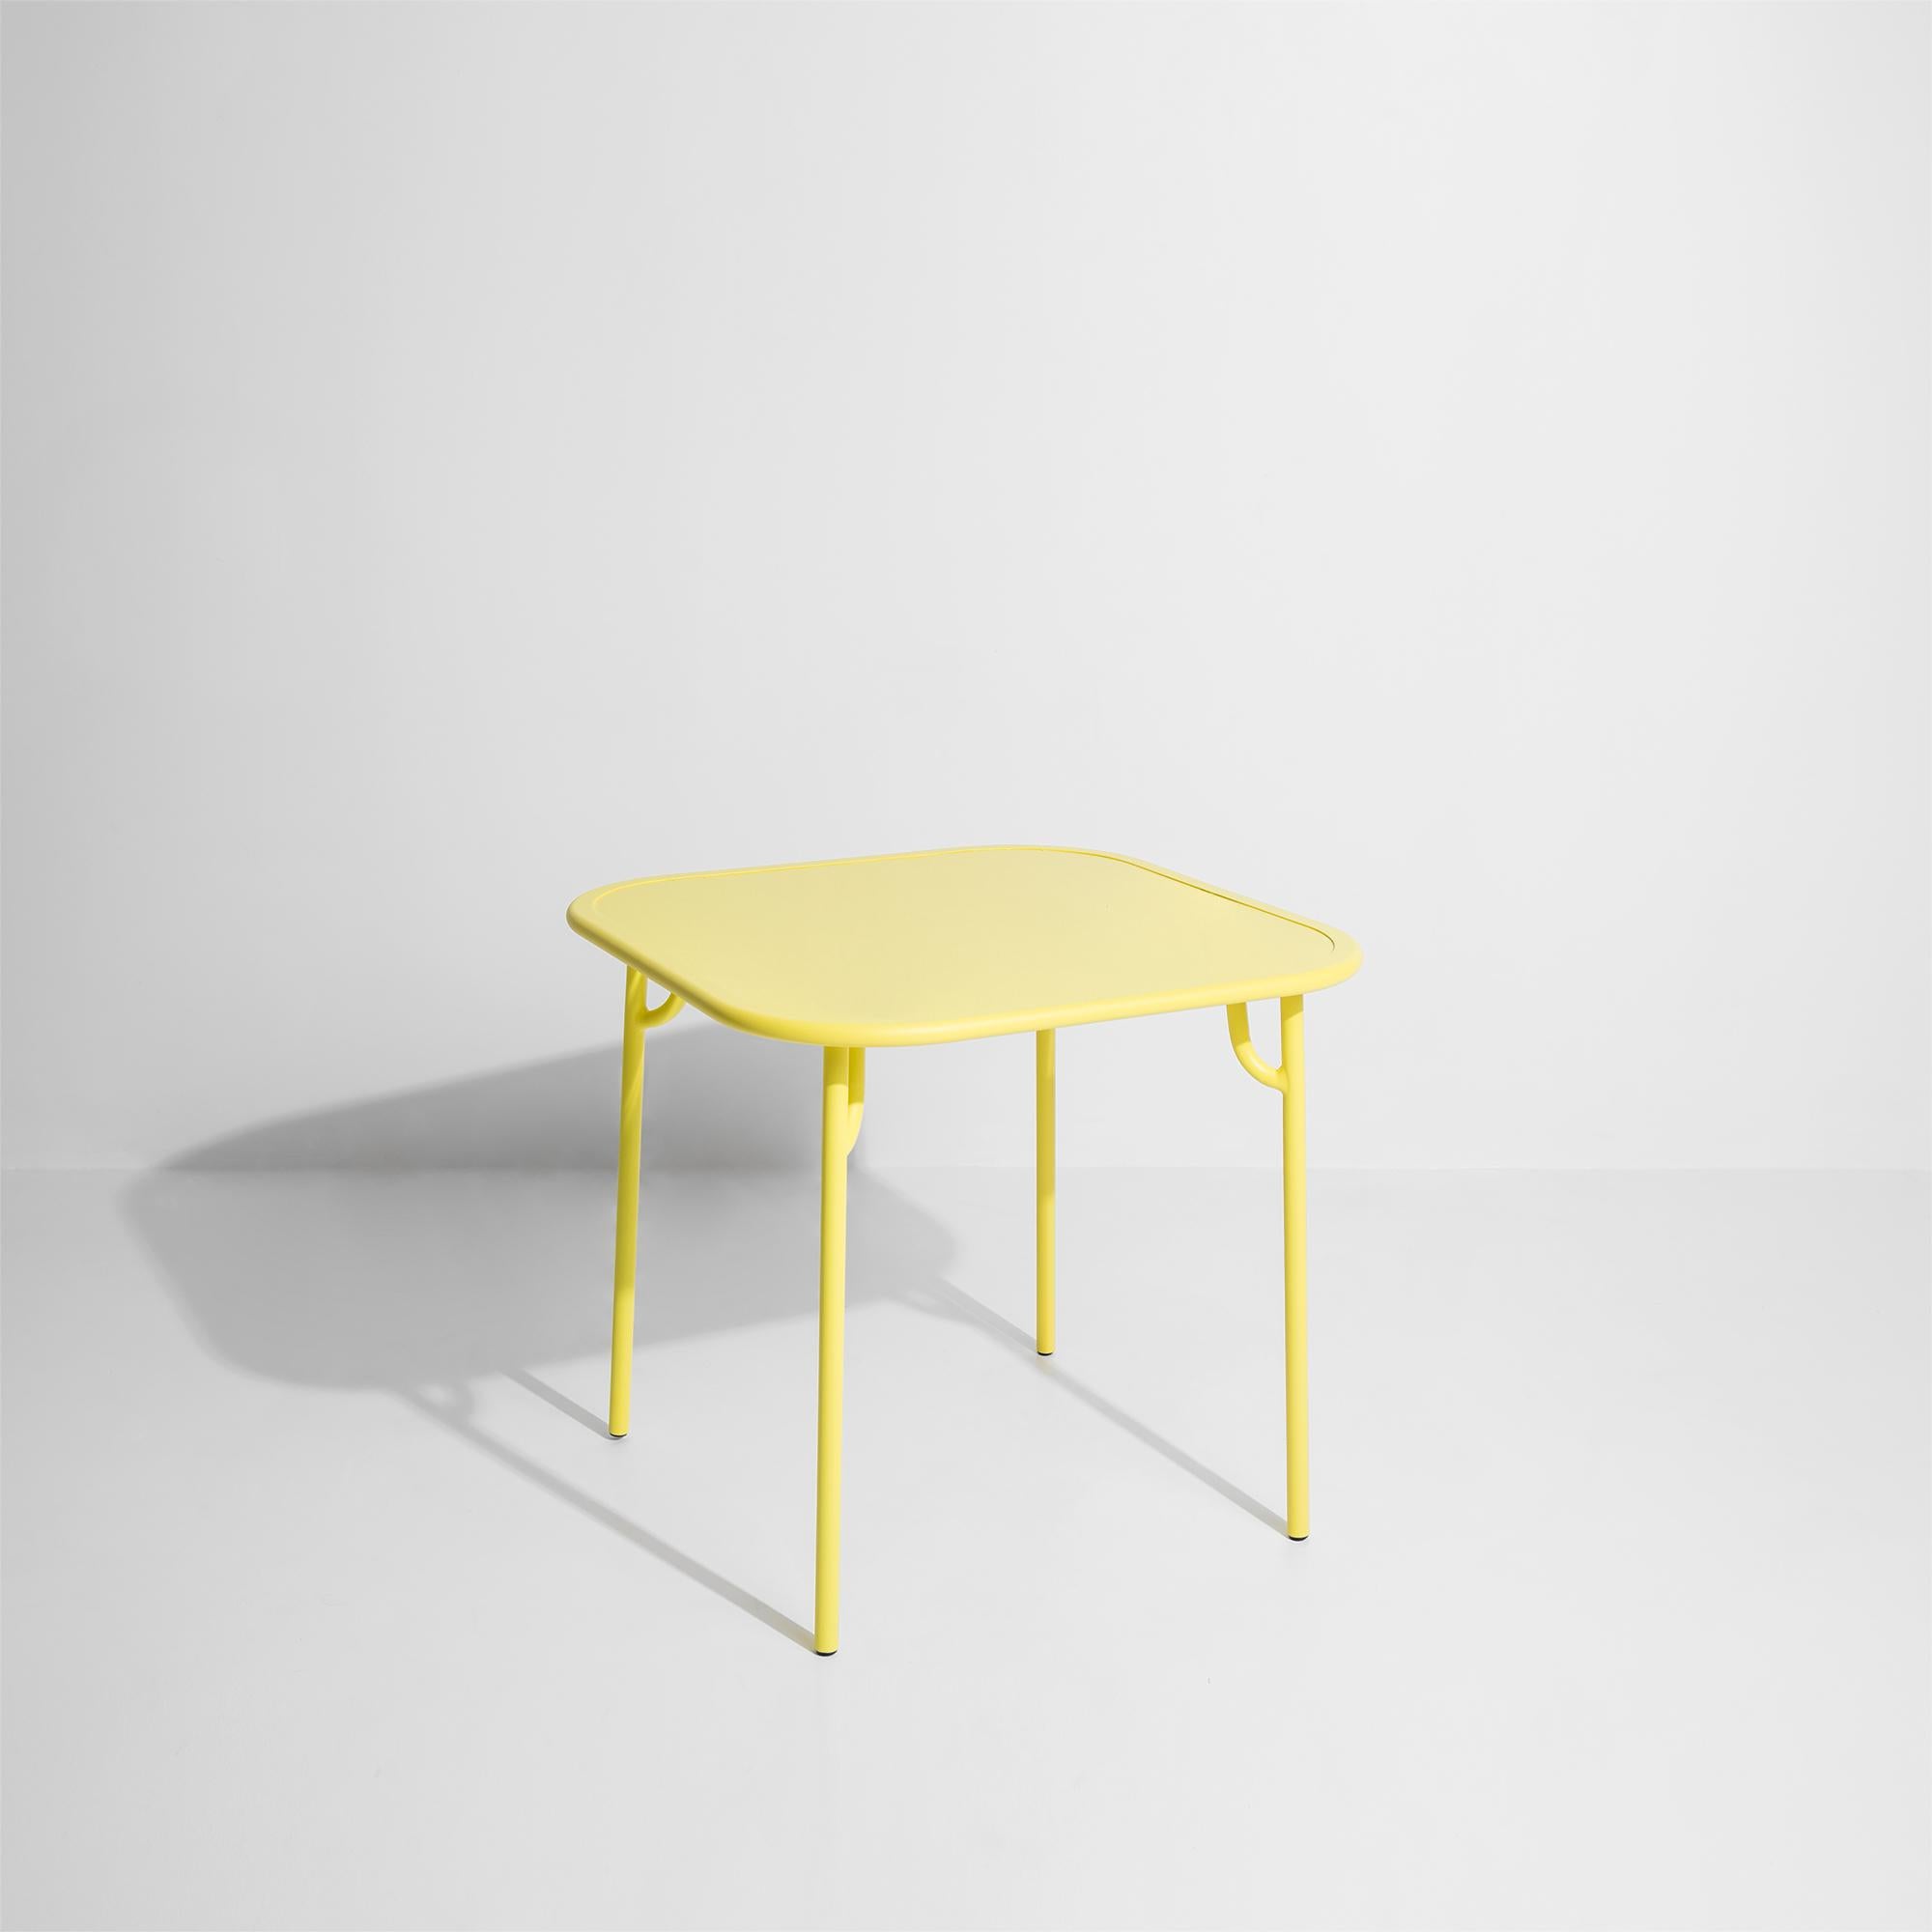 Chinese Petite Friture Week-End Plain Square Dining Table in Yellow Aluminium, 2017 For Sale